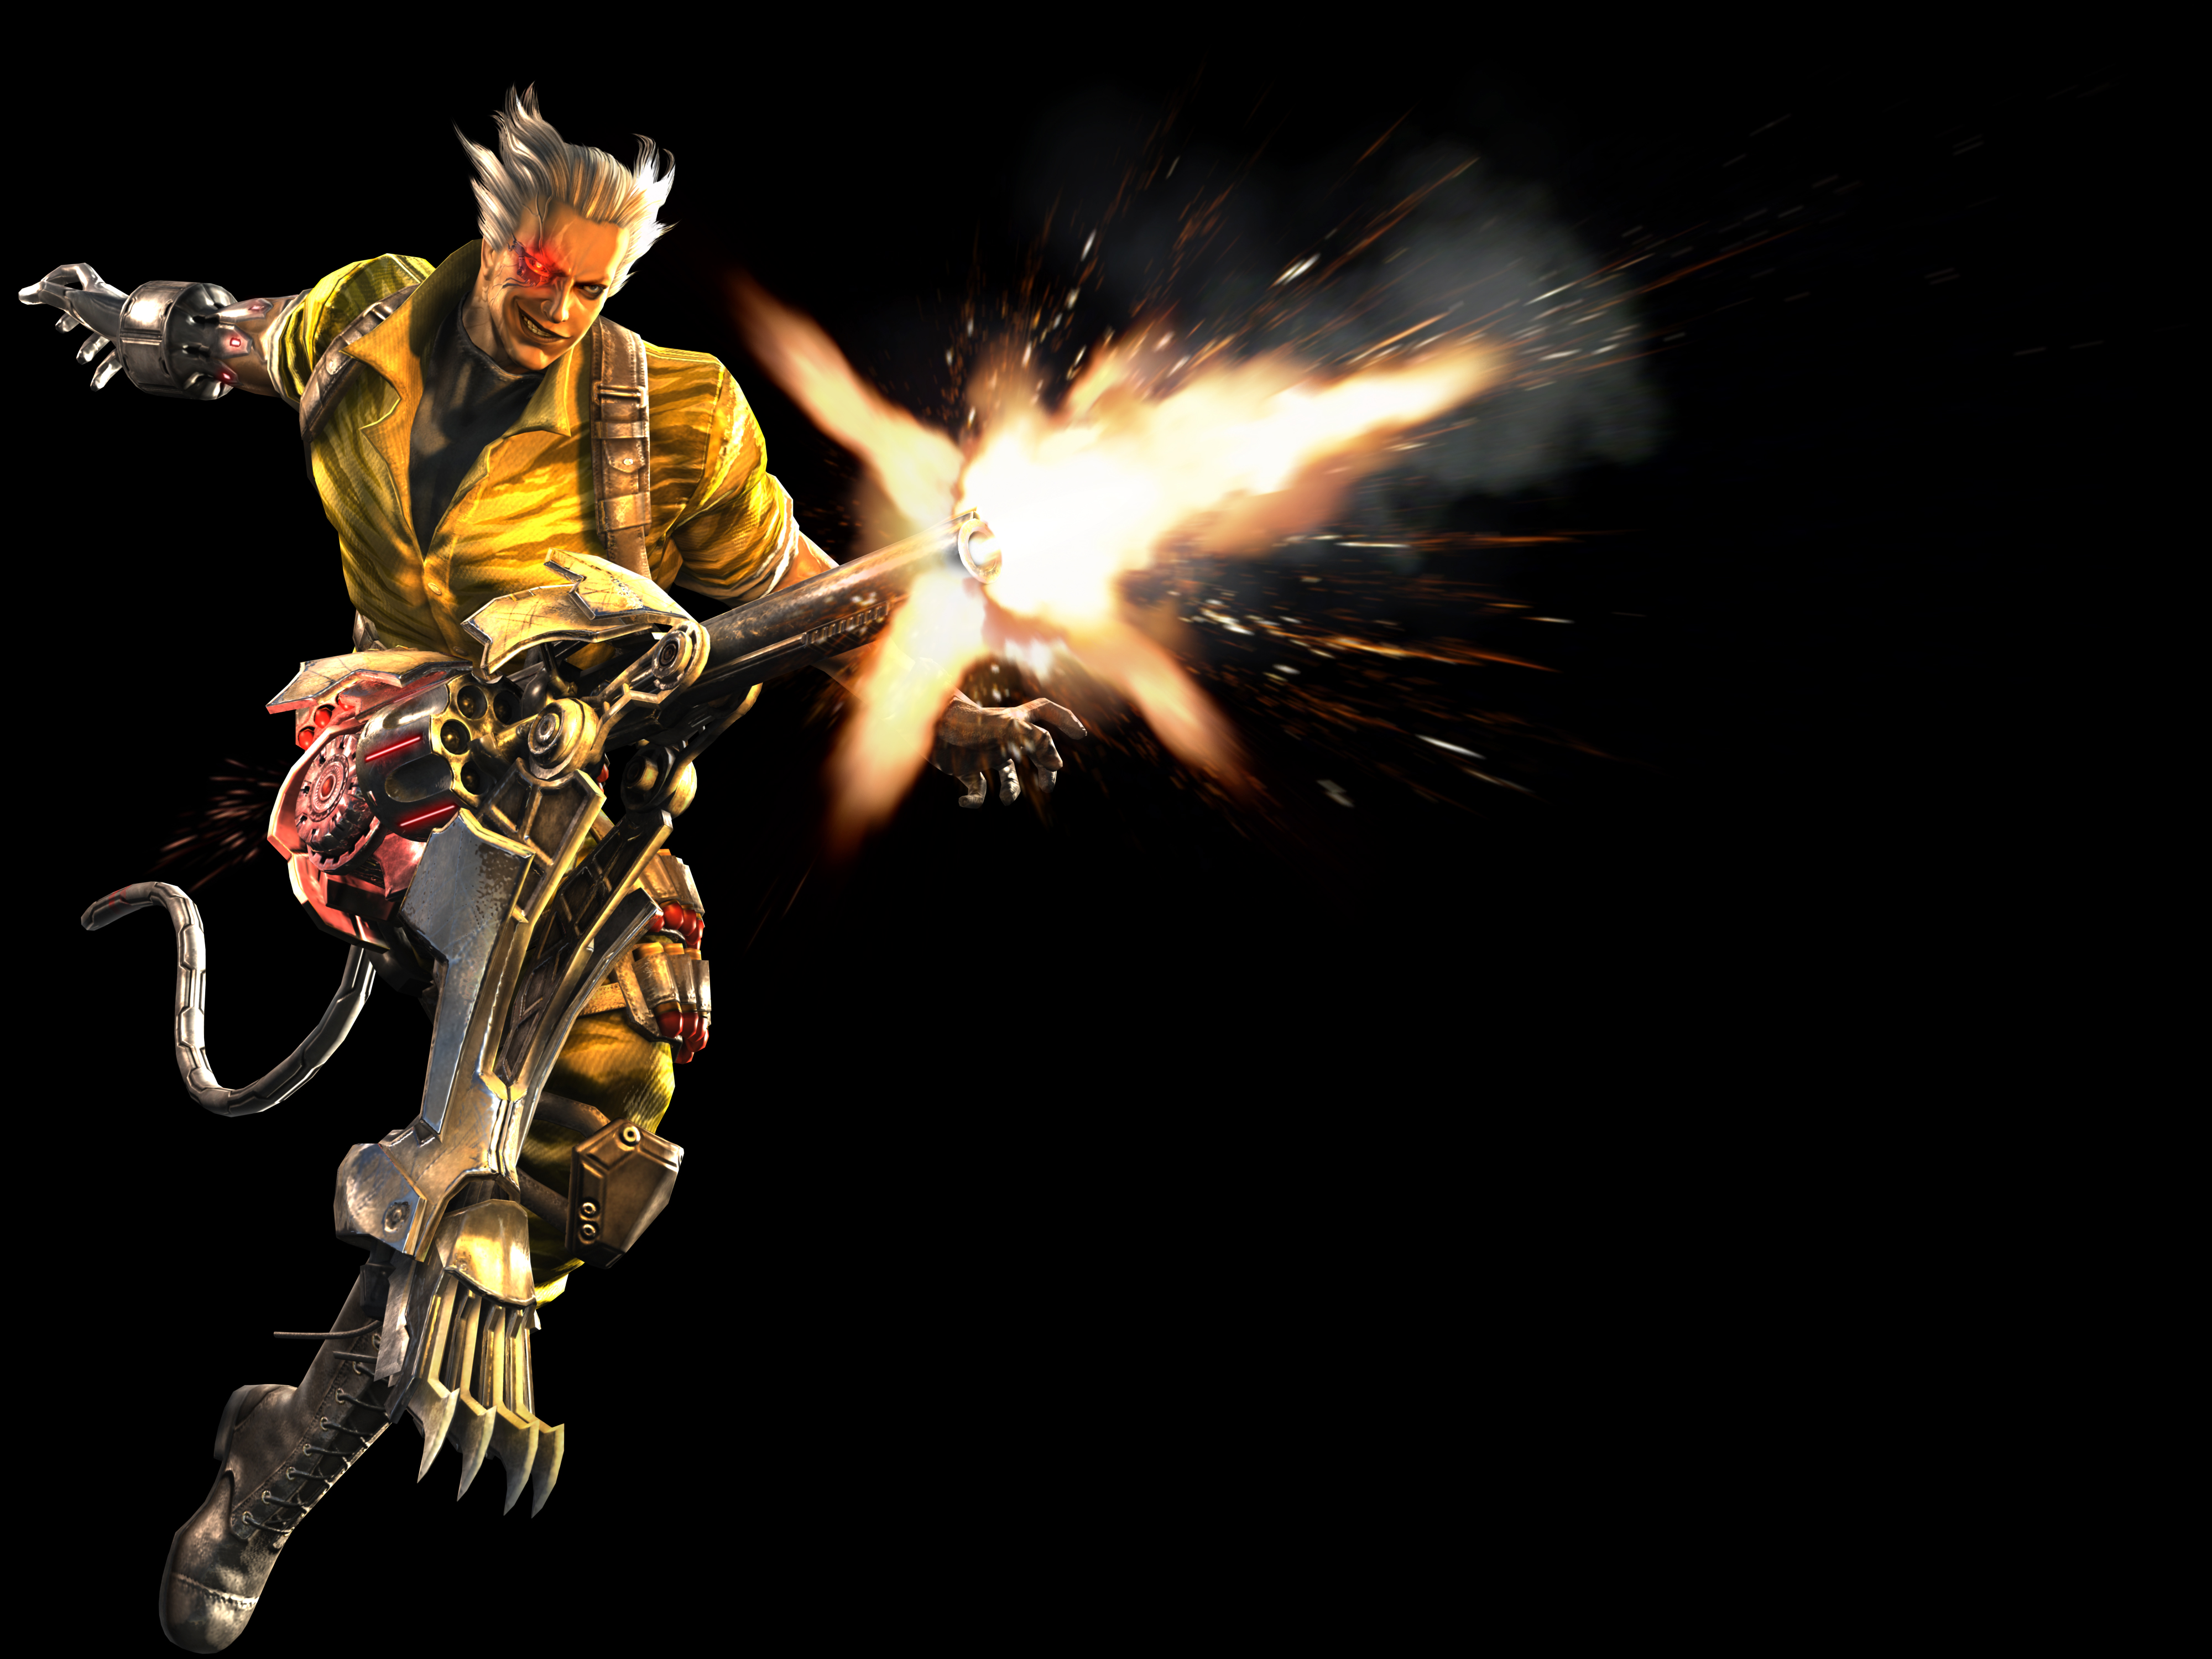 Video Game Anarchy Reigns HD Wallpaper | Background Image